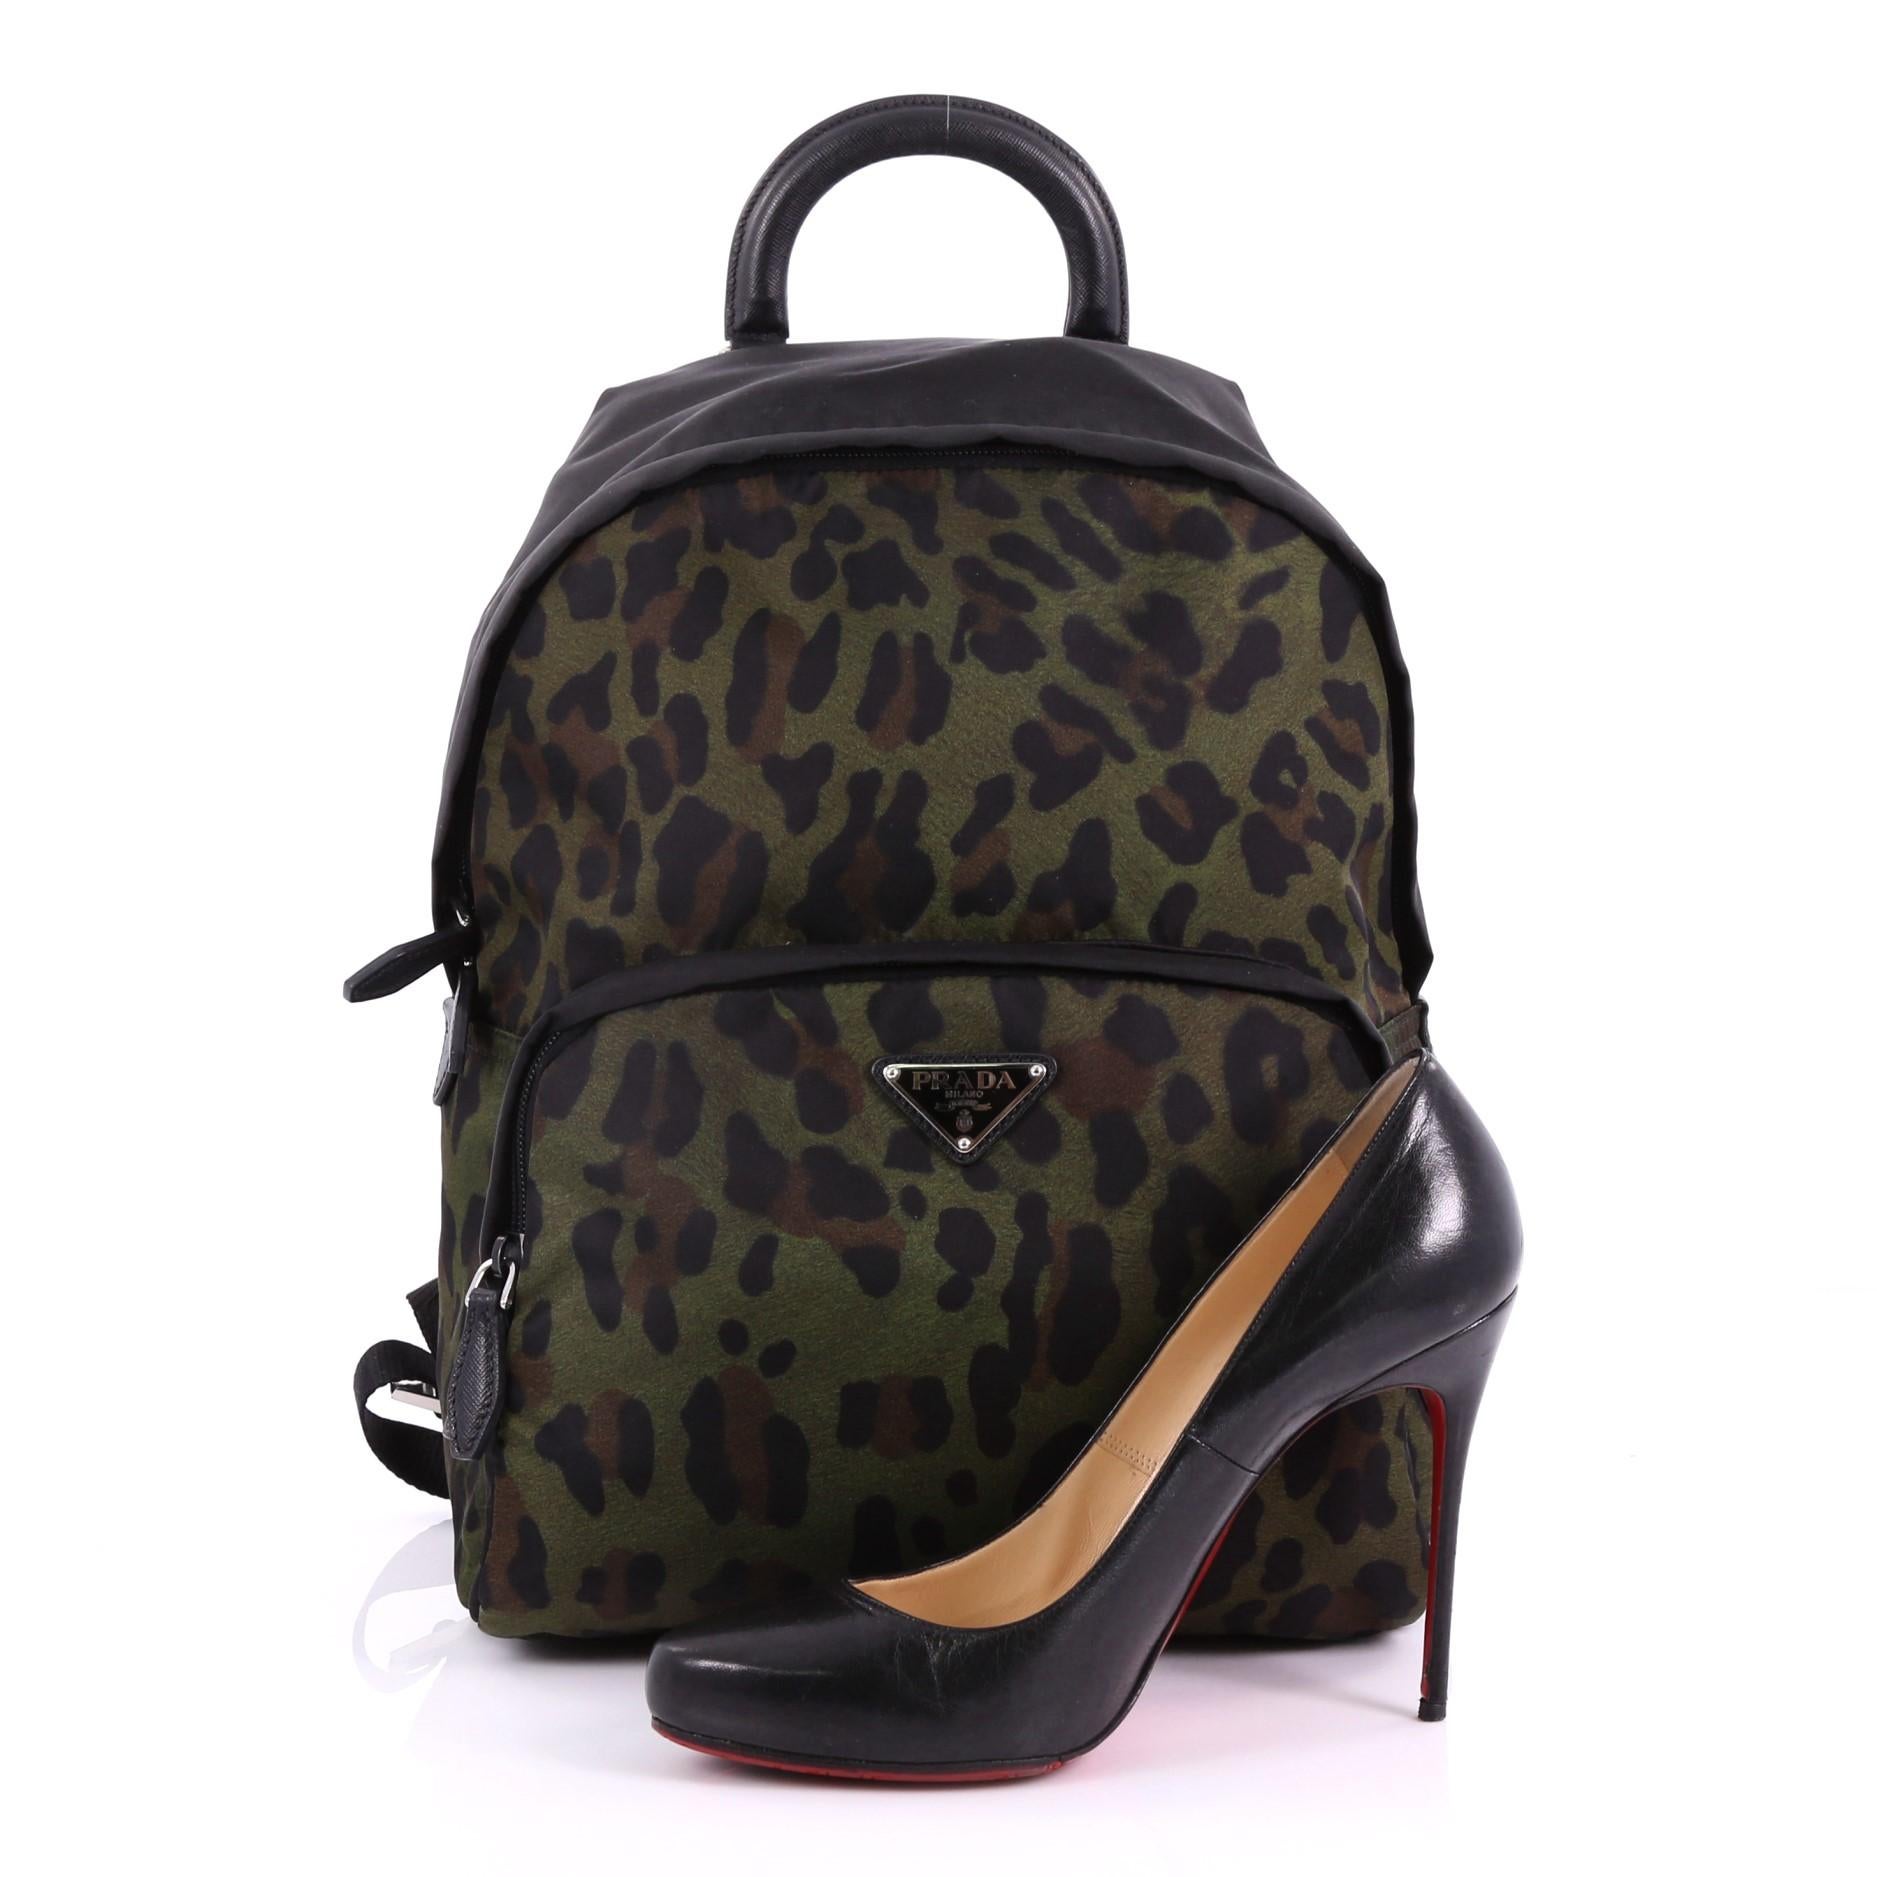 This Prada Front Pocket Backpack Printed Tessuto Medium, crafted in black and green printed tessuto, features a top carry handle, adjustable back shoulder straps, exterior front zip pocket, and silver-tone hardware. Its zip closure opens to a black